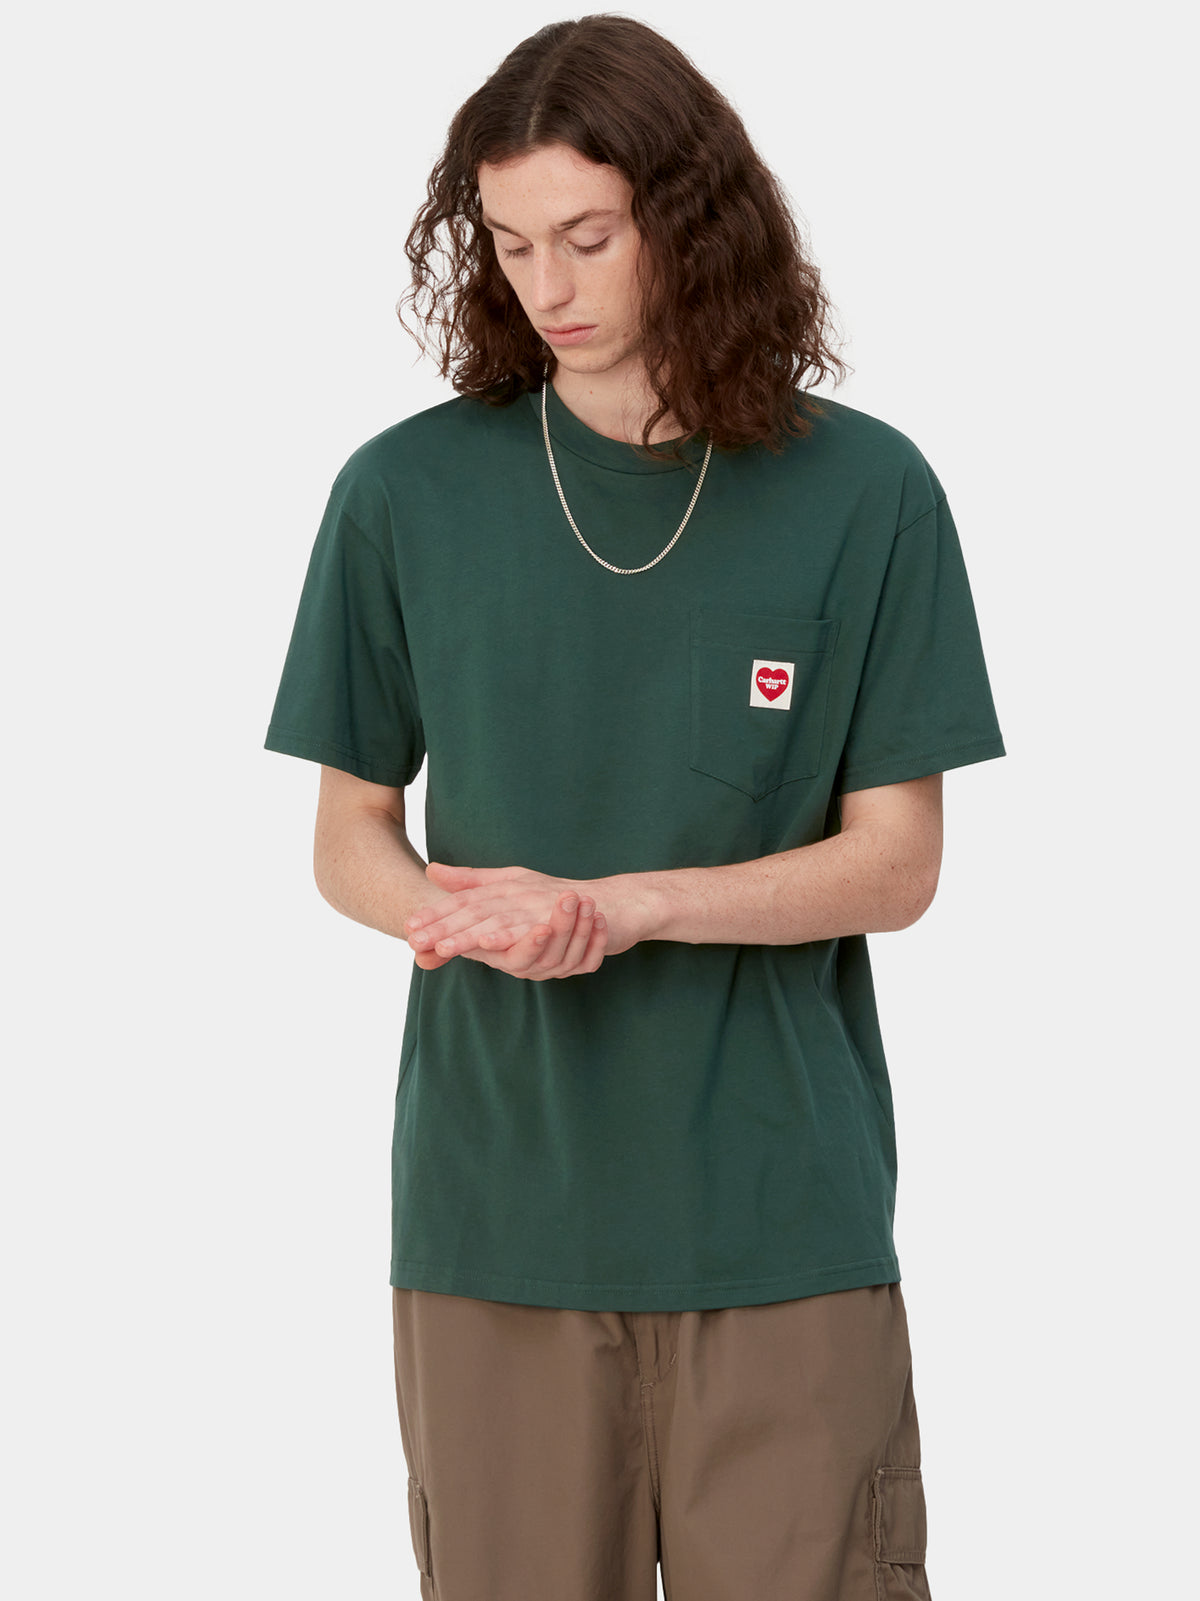 Short Sleeve Heart Pocket T-Shirt in Discovery Green